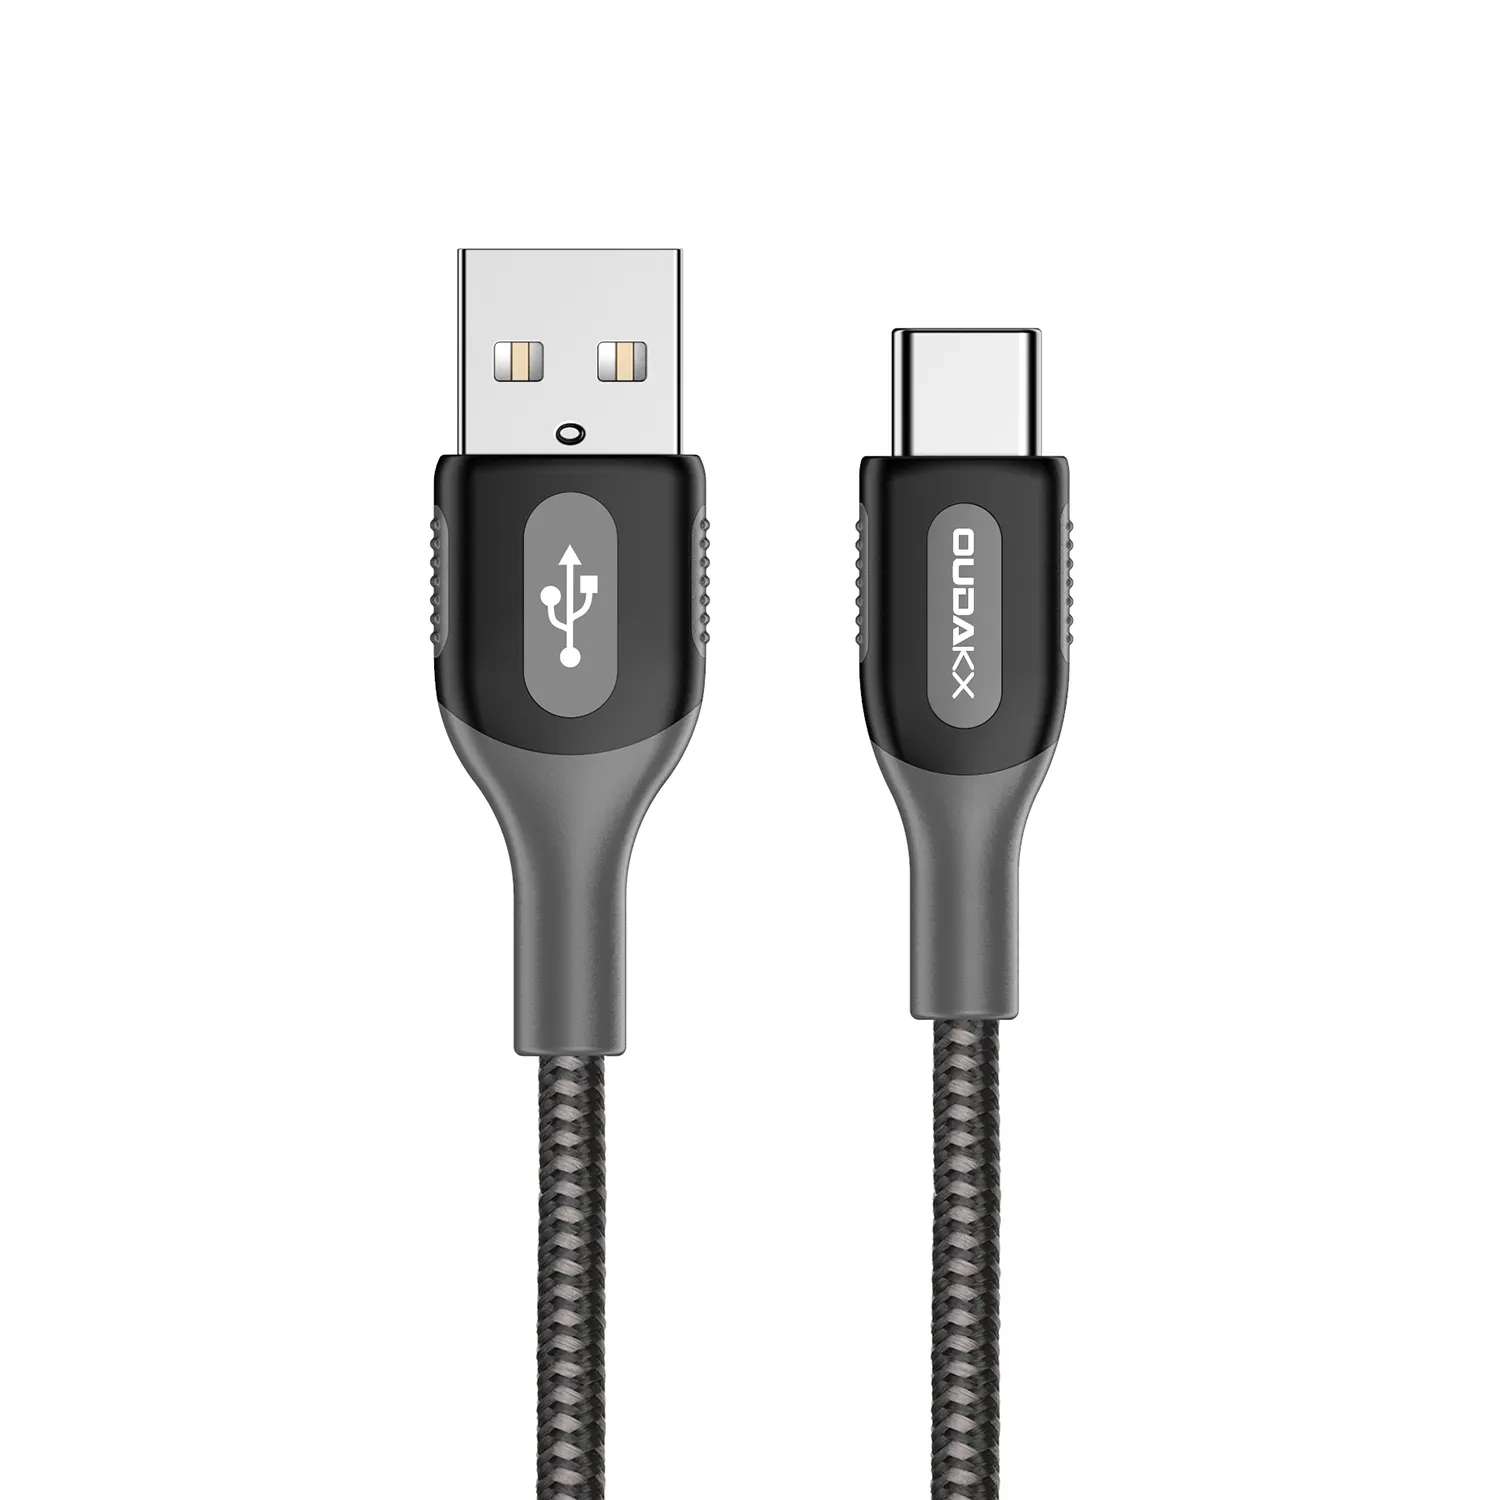 Usb Phone Charge Cable USB Type C Cable For Samsung S10 S9 S8 Fast Charge Type-C Mobile Phone Charging Data Cable USB C Cable For Huawei